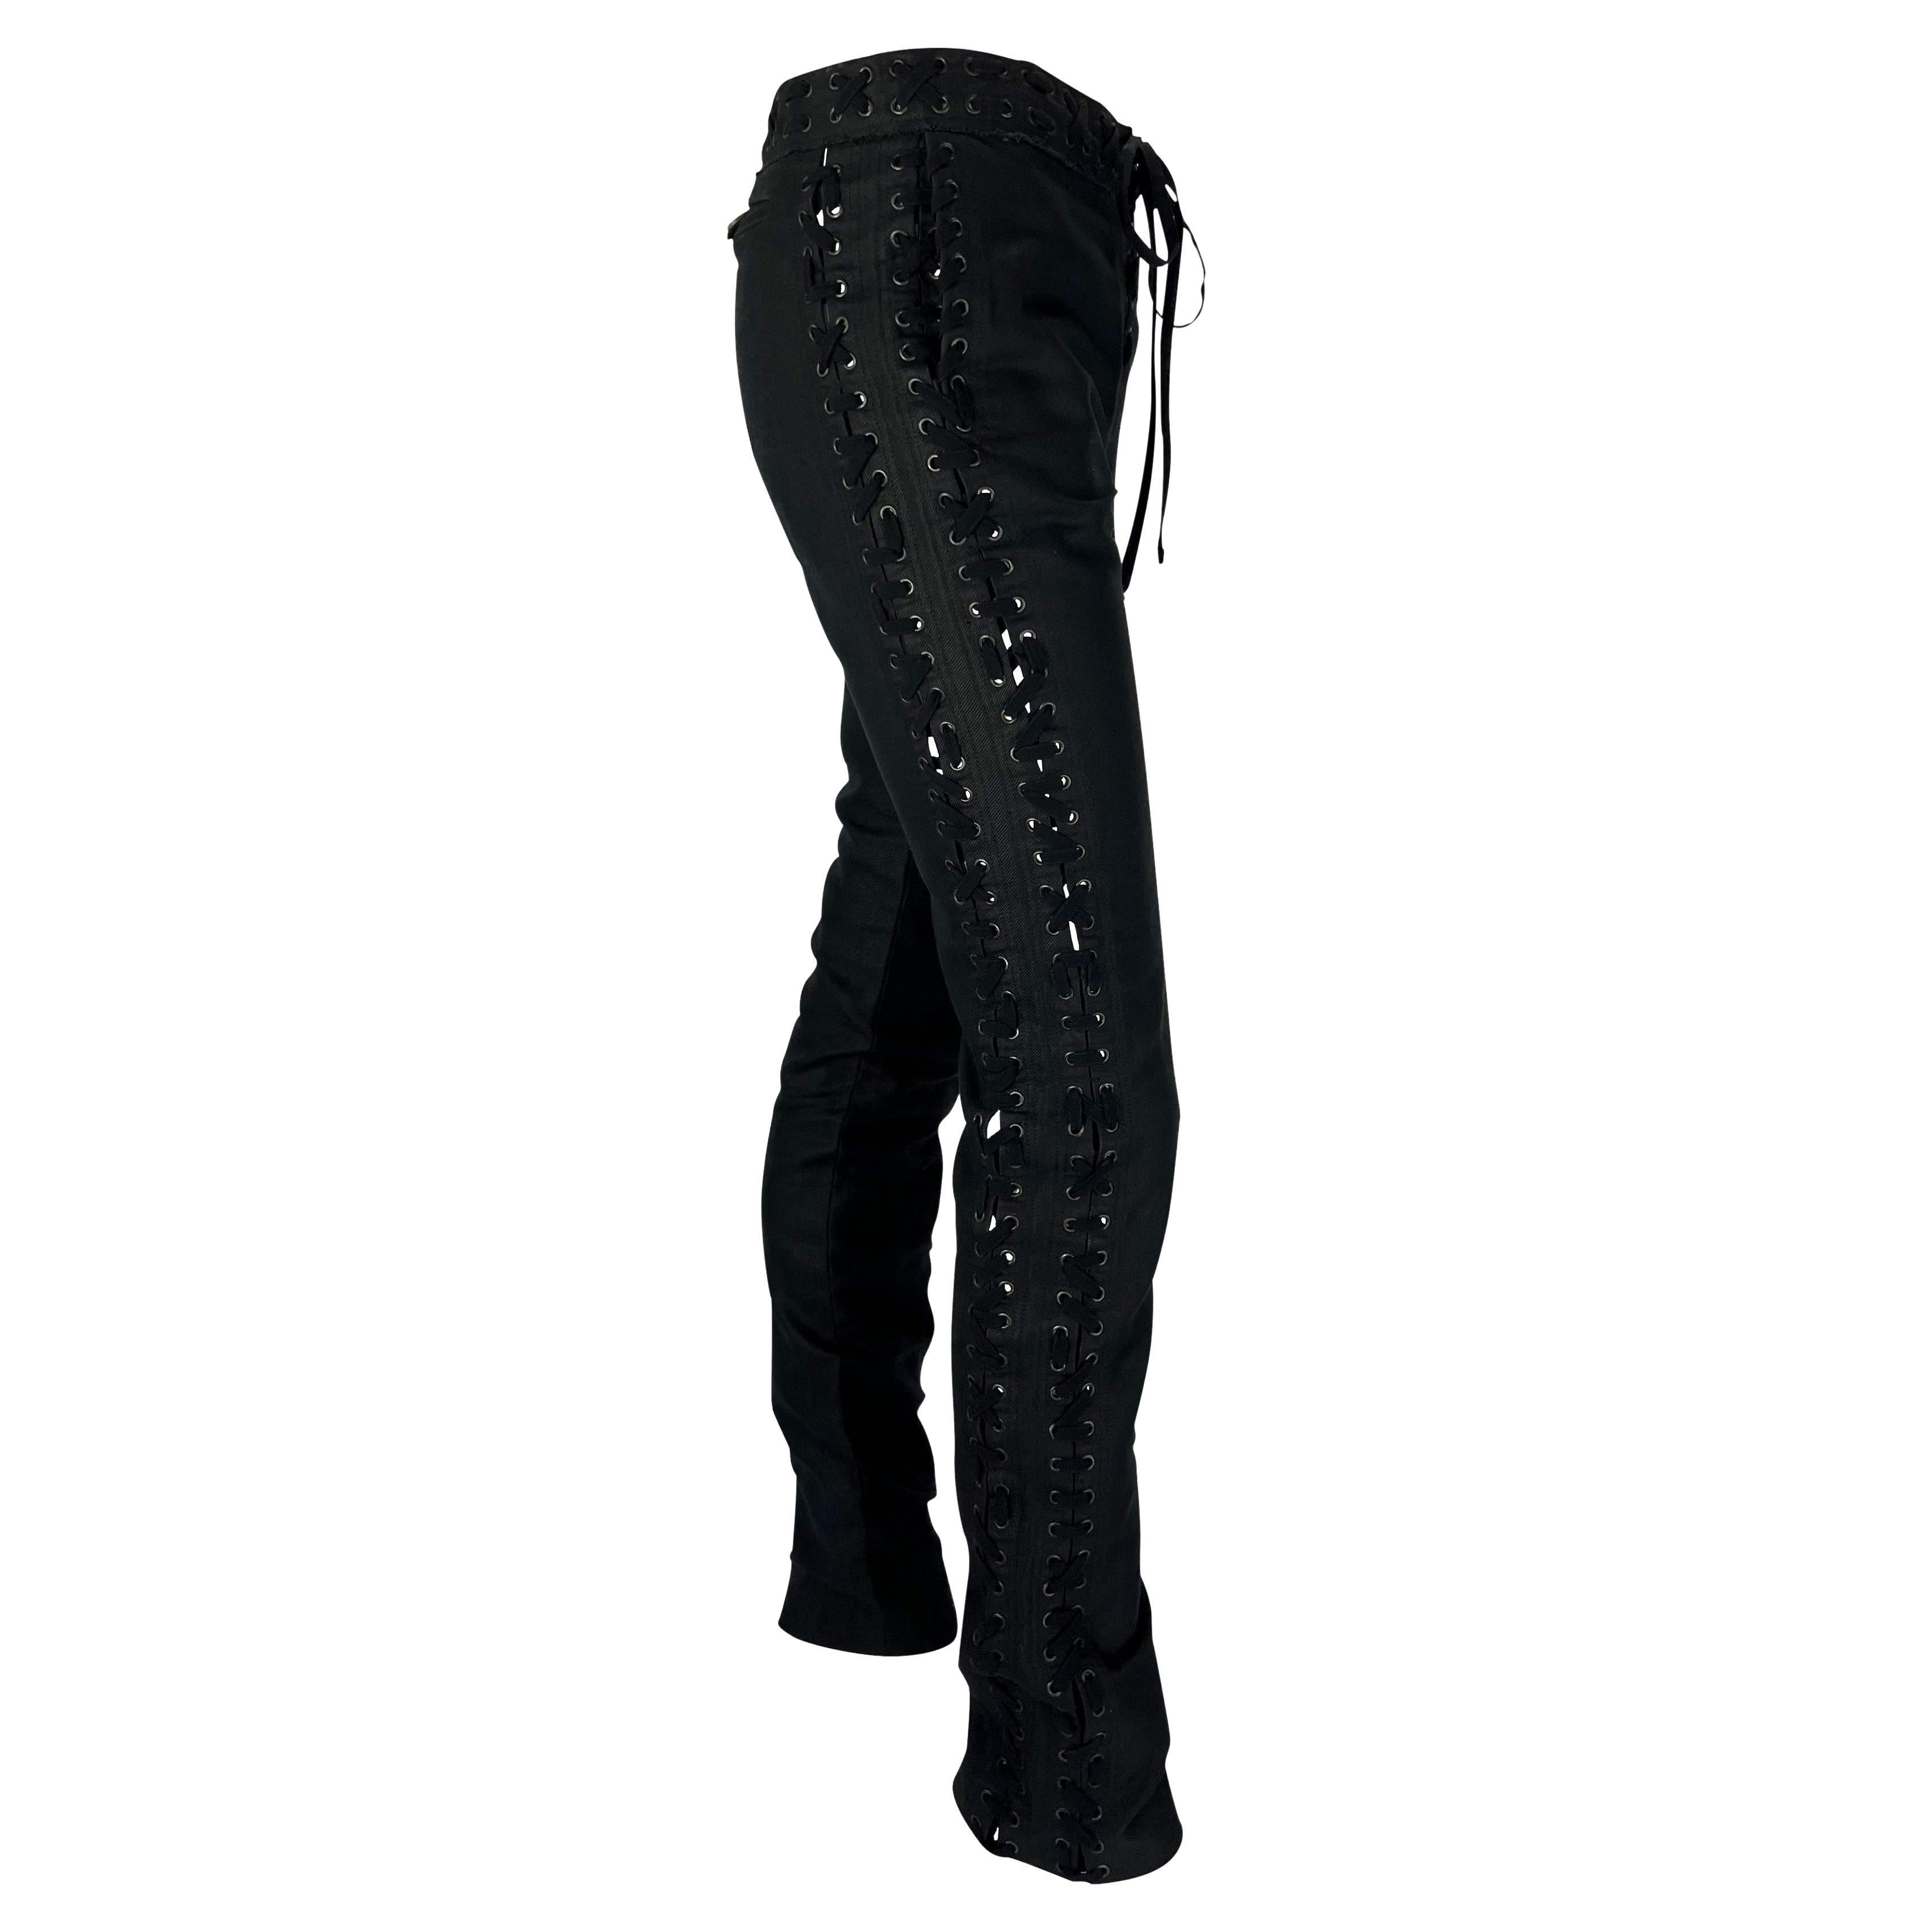 S/S 2002 Yves Saint Laurent by Tom Ford Safari Collection Lace Up Black Pants